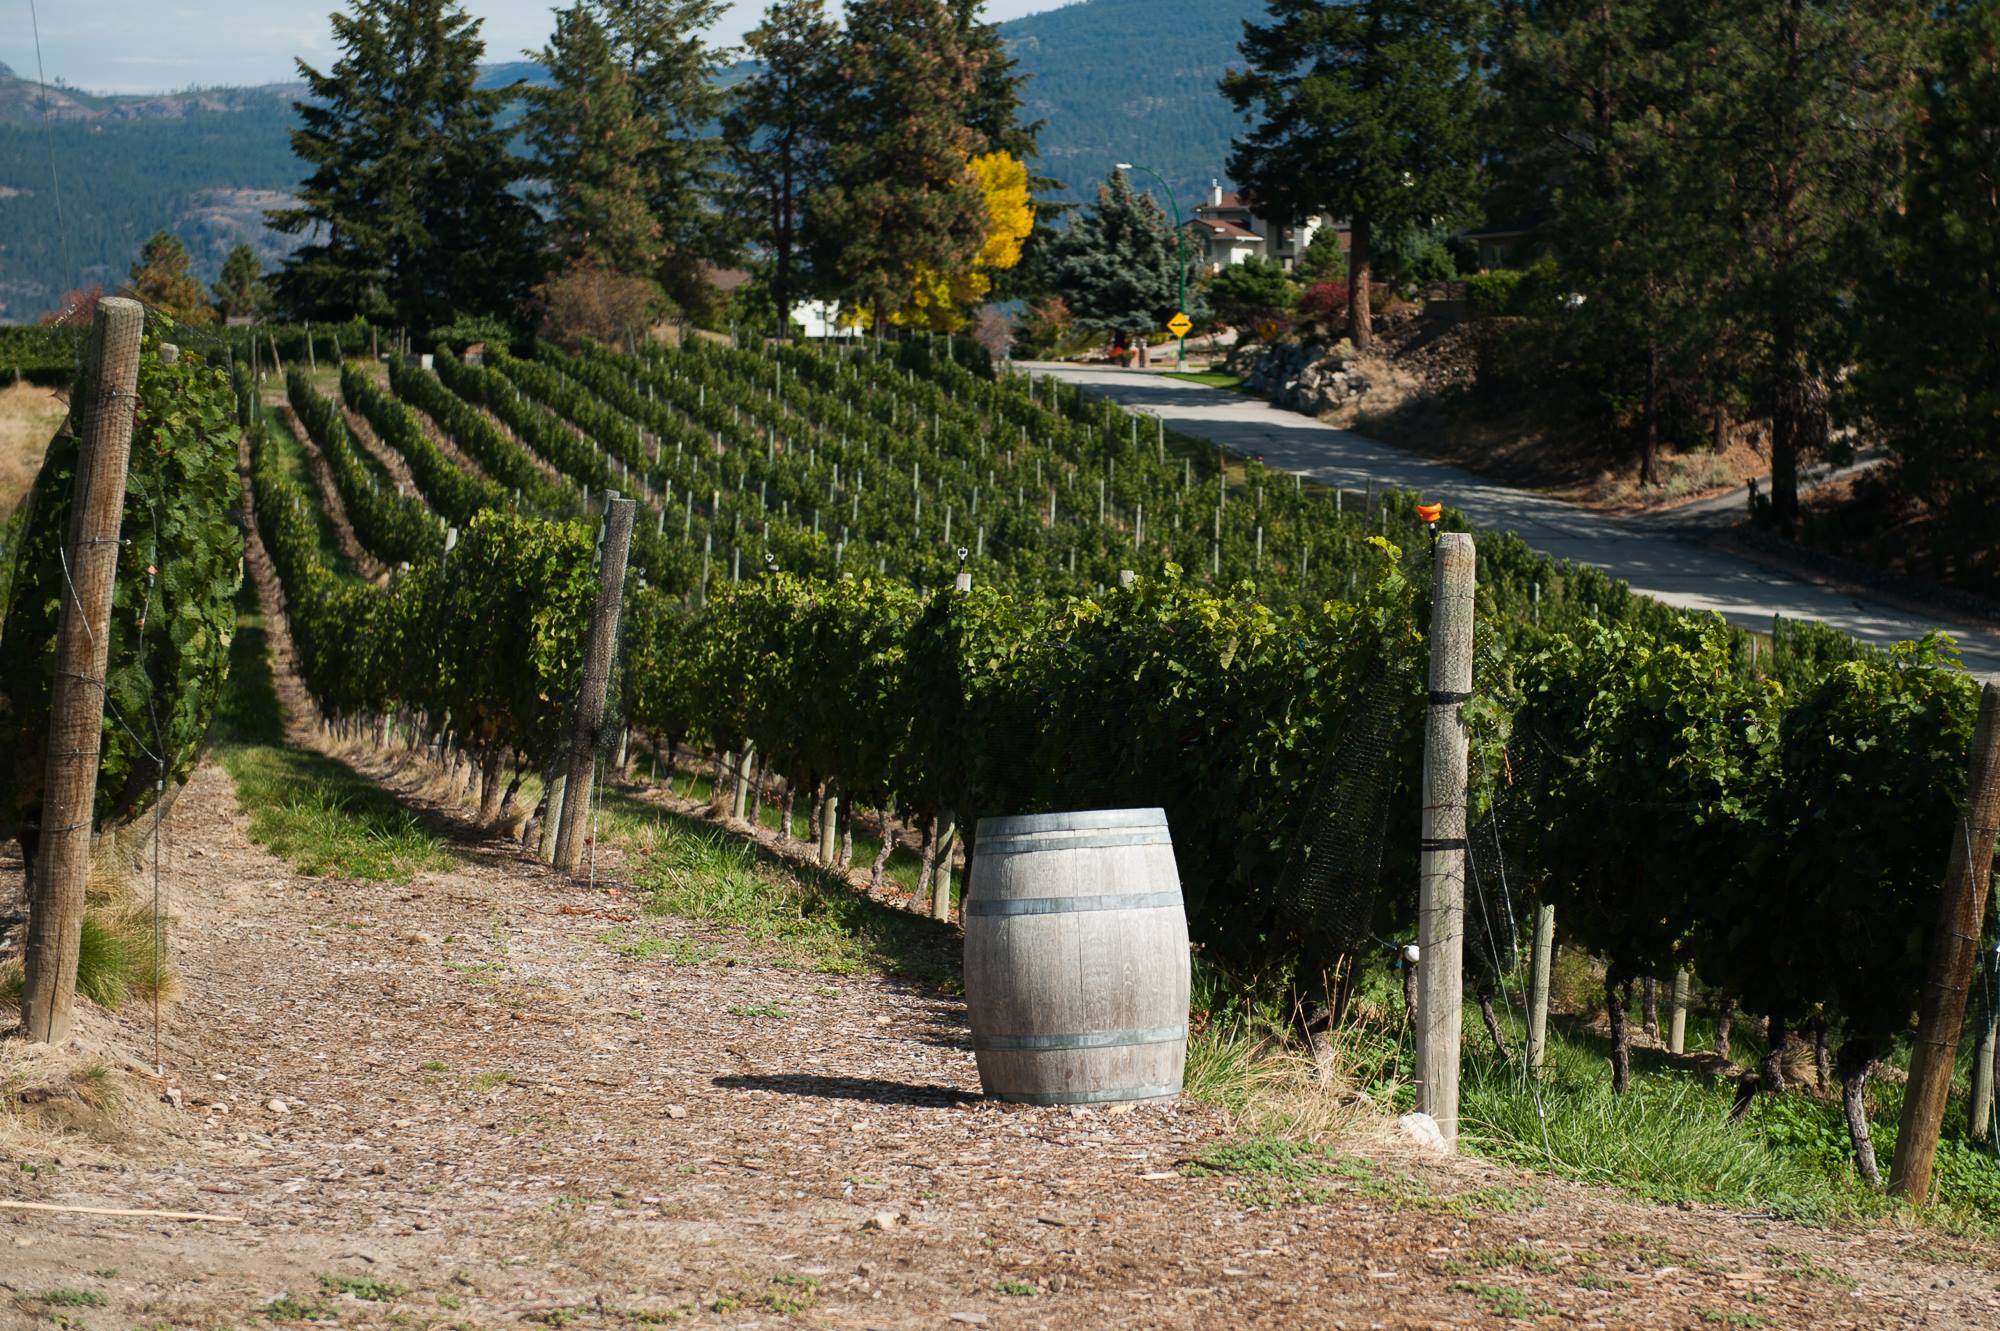 Package 6 - Tour Summerland wineries with Okangan Limousine.